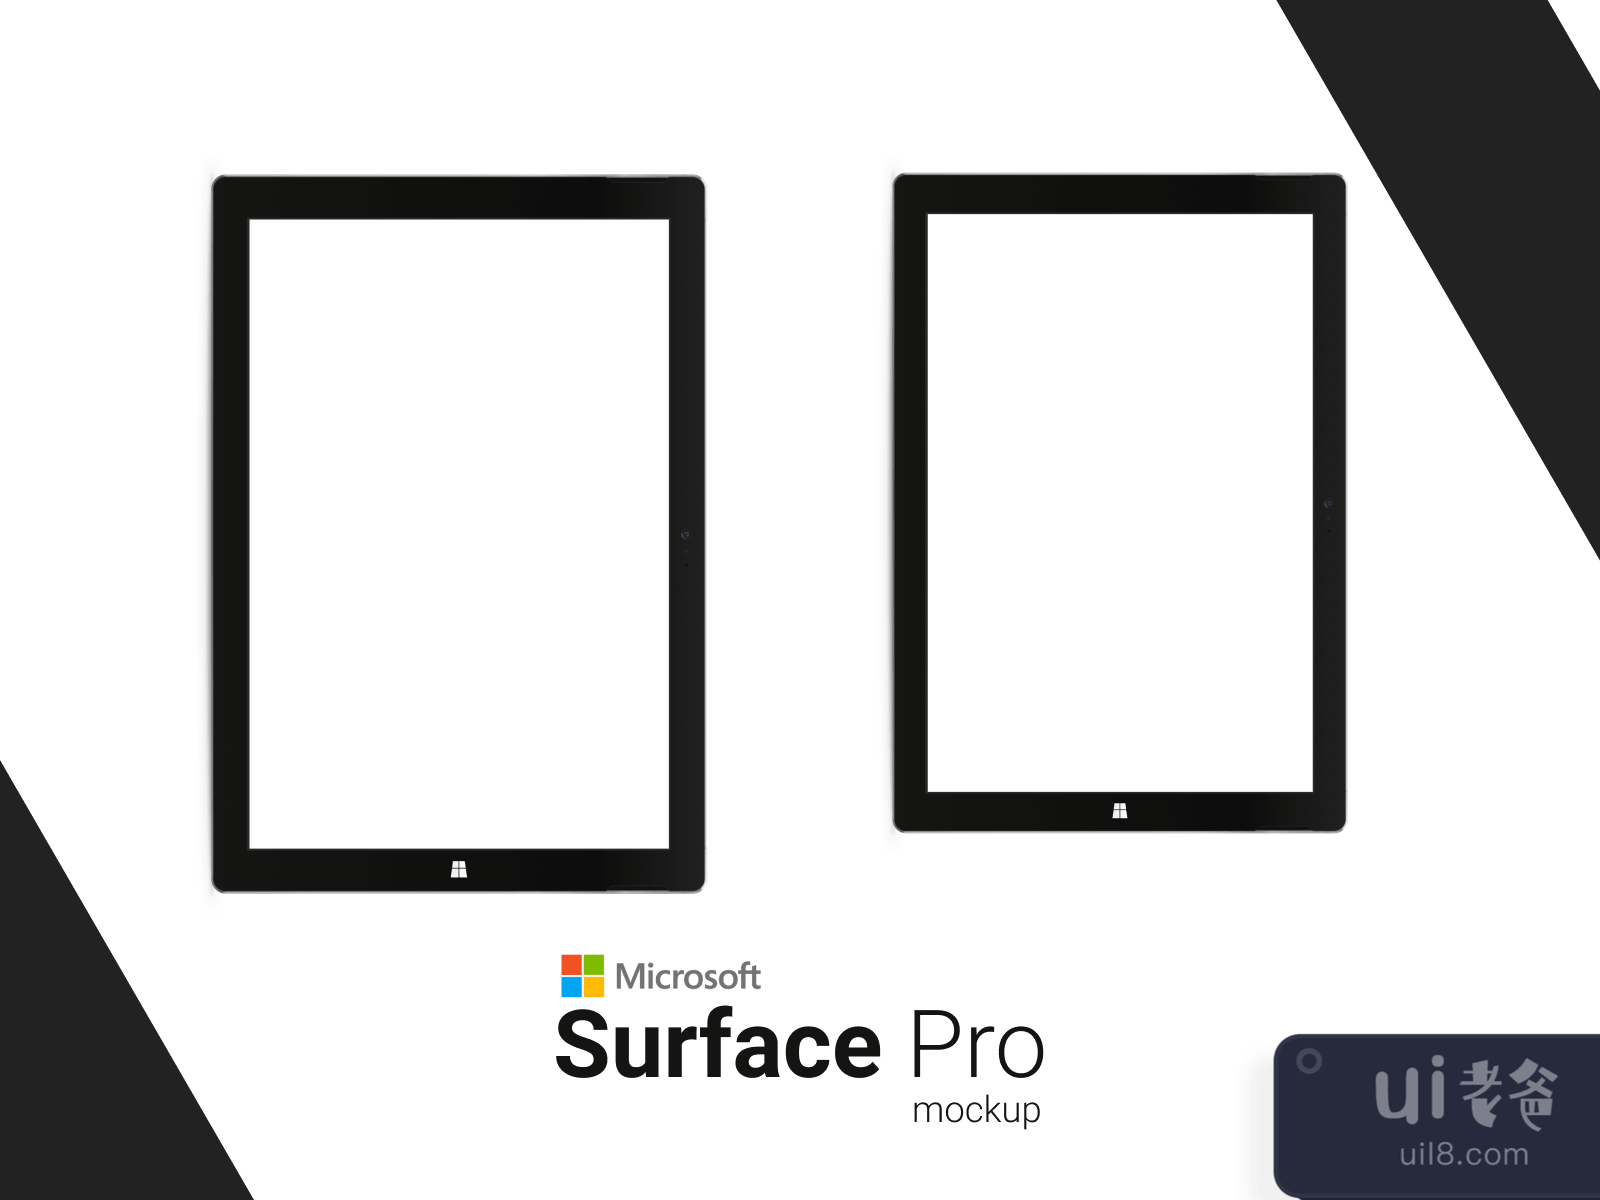 Microsoft Surface Pro 4 Mockup for Figma and Adobe XD No 3